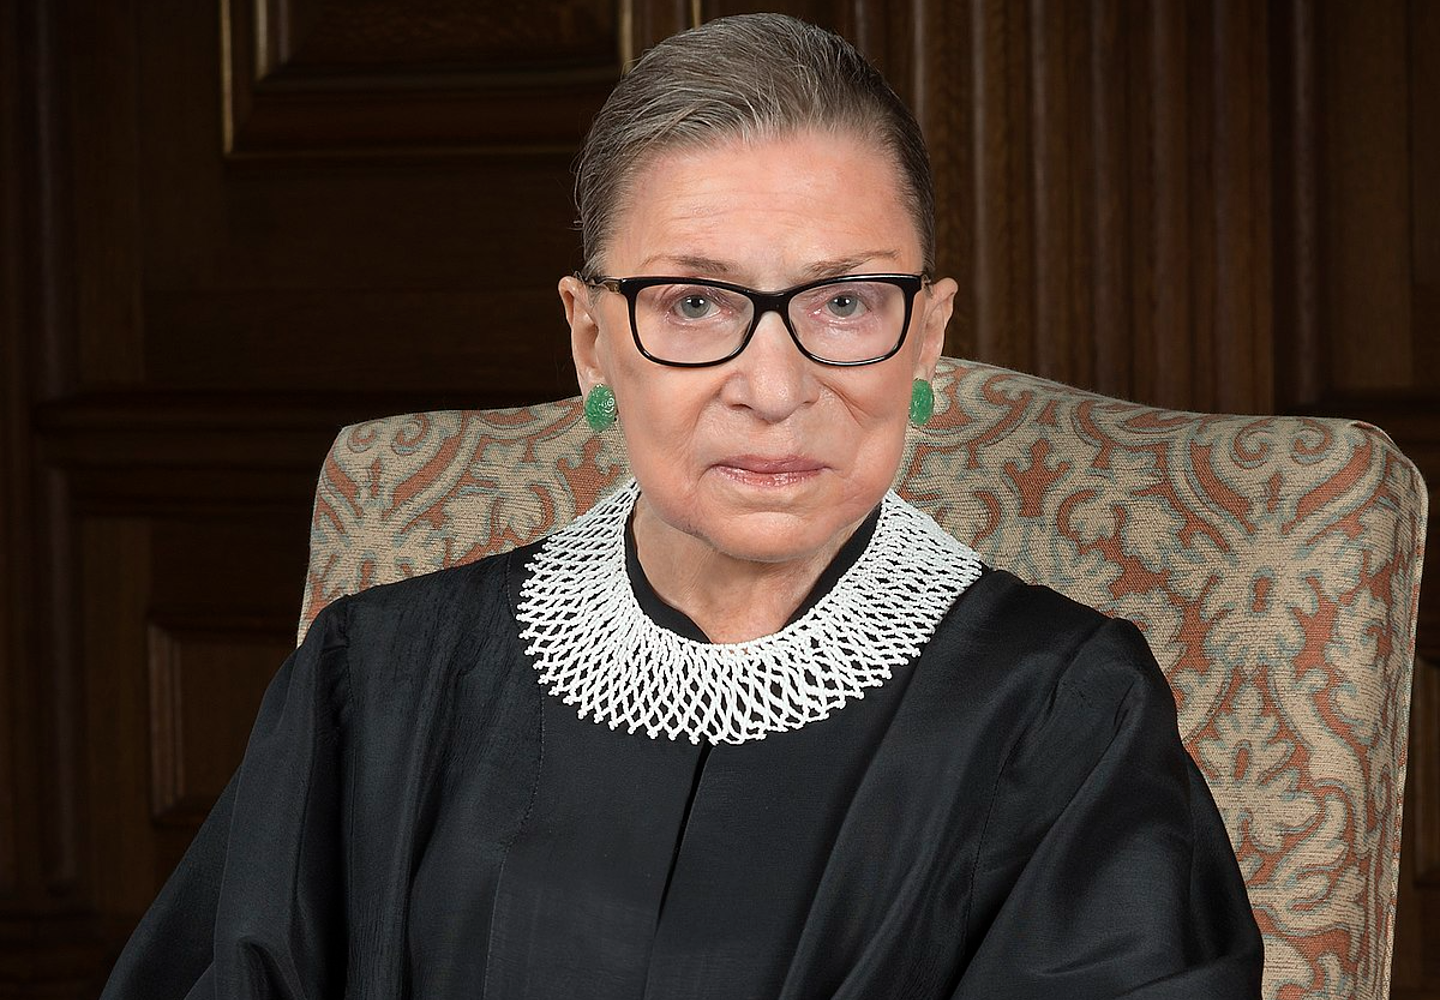 Live with Carnegie Hall: Remembering Ruth Bader Ginsburg